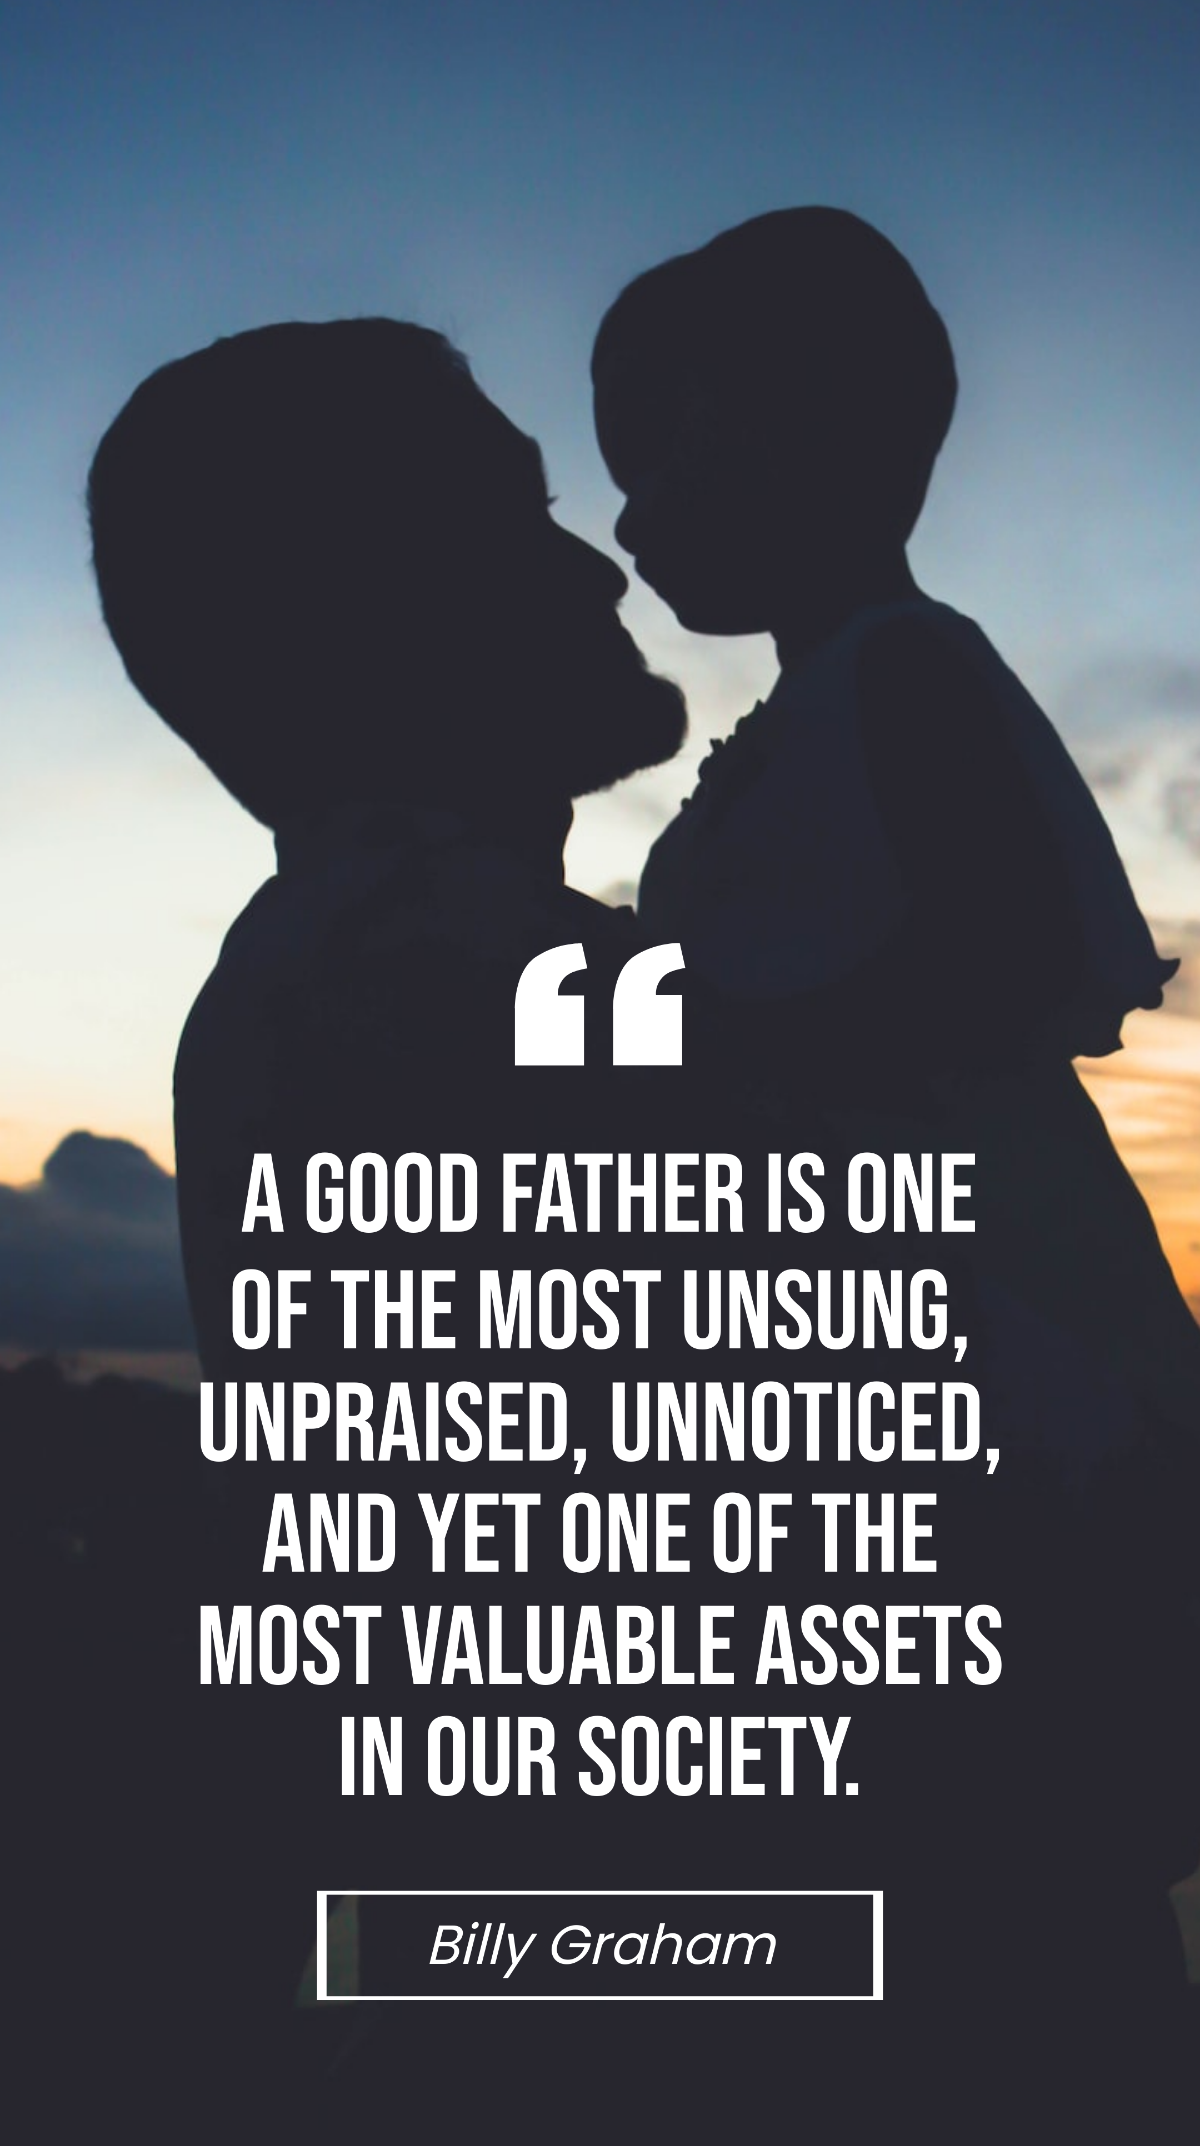 Billy Graham - A good father is one of the most unsung, unpraised, unnoticed, and yet one of the most valuable assets in our society. Template